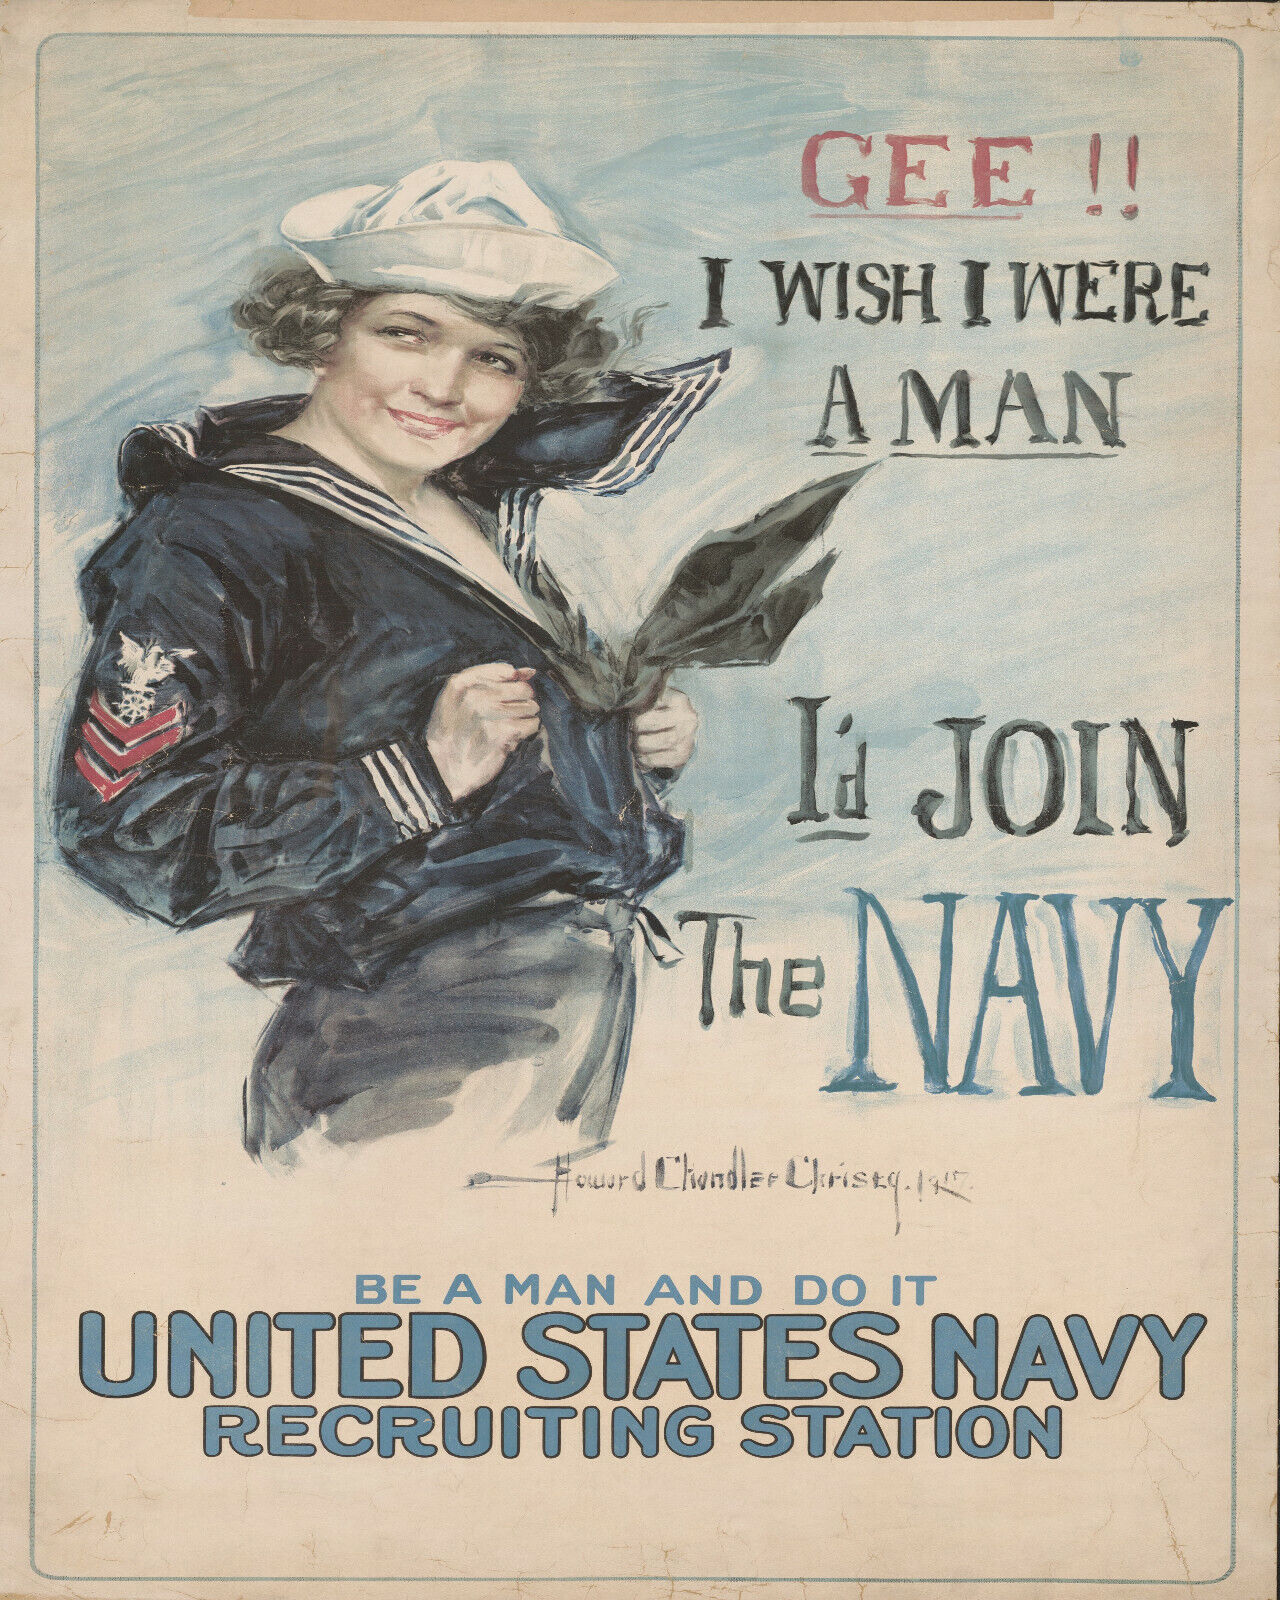 WW1 War Time Poster 8x10 Photo Gee I wish I were a man, I'd join the Navy 1917